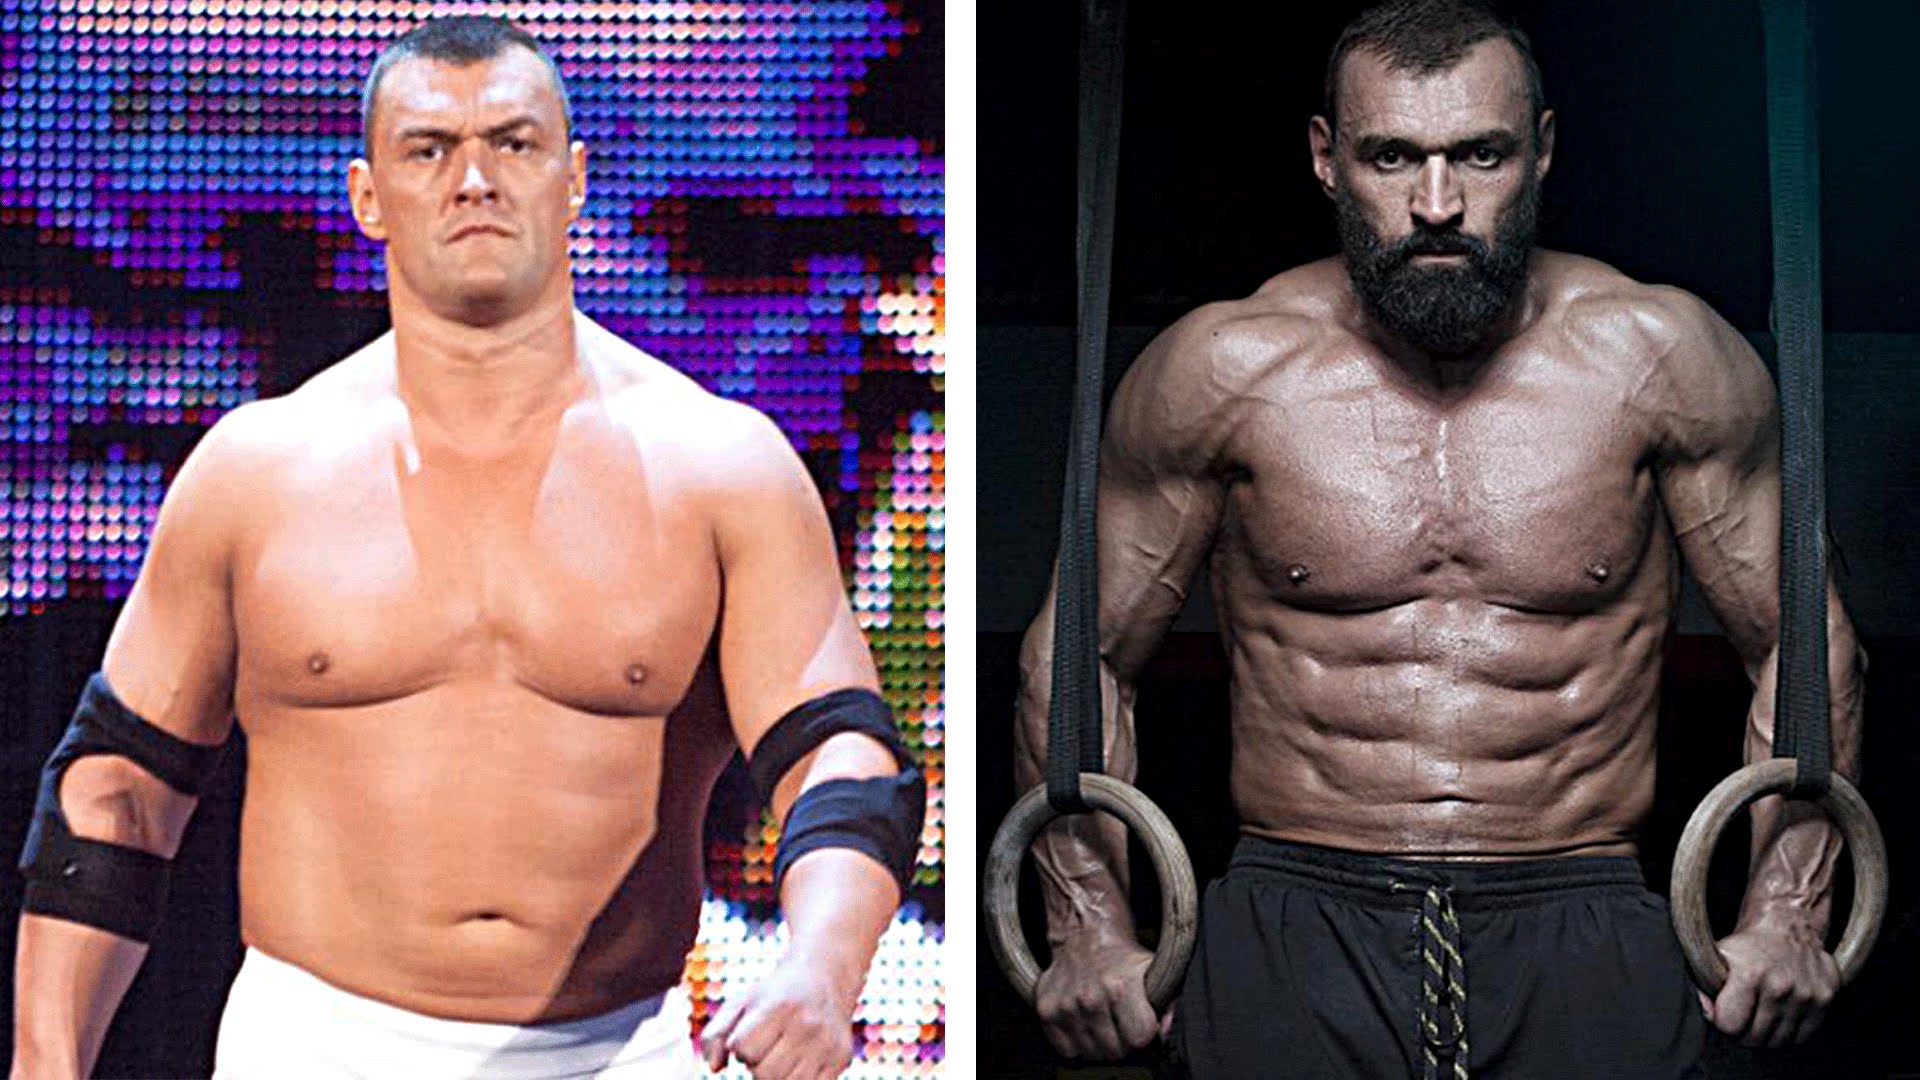 5 WWE WRESTLERS WHO LOOK BETTER THAN THEY DID BEFORE